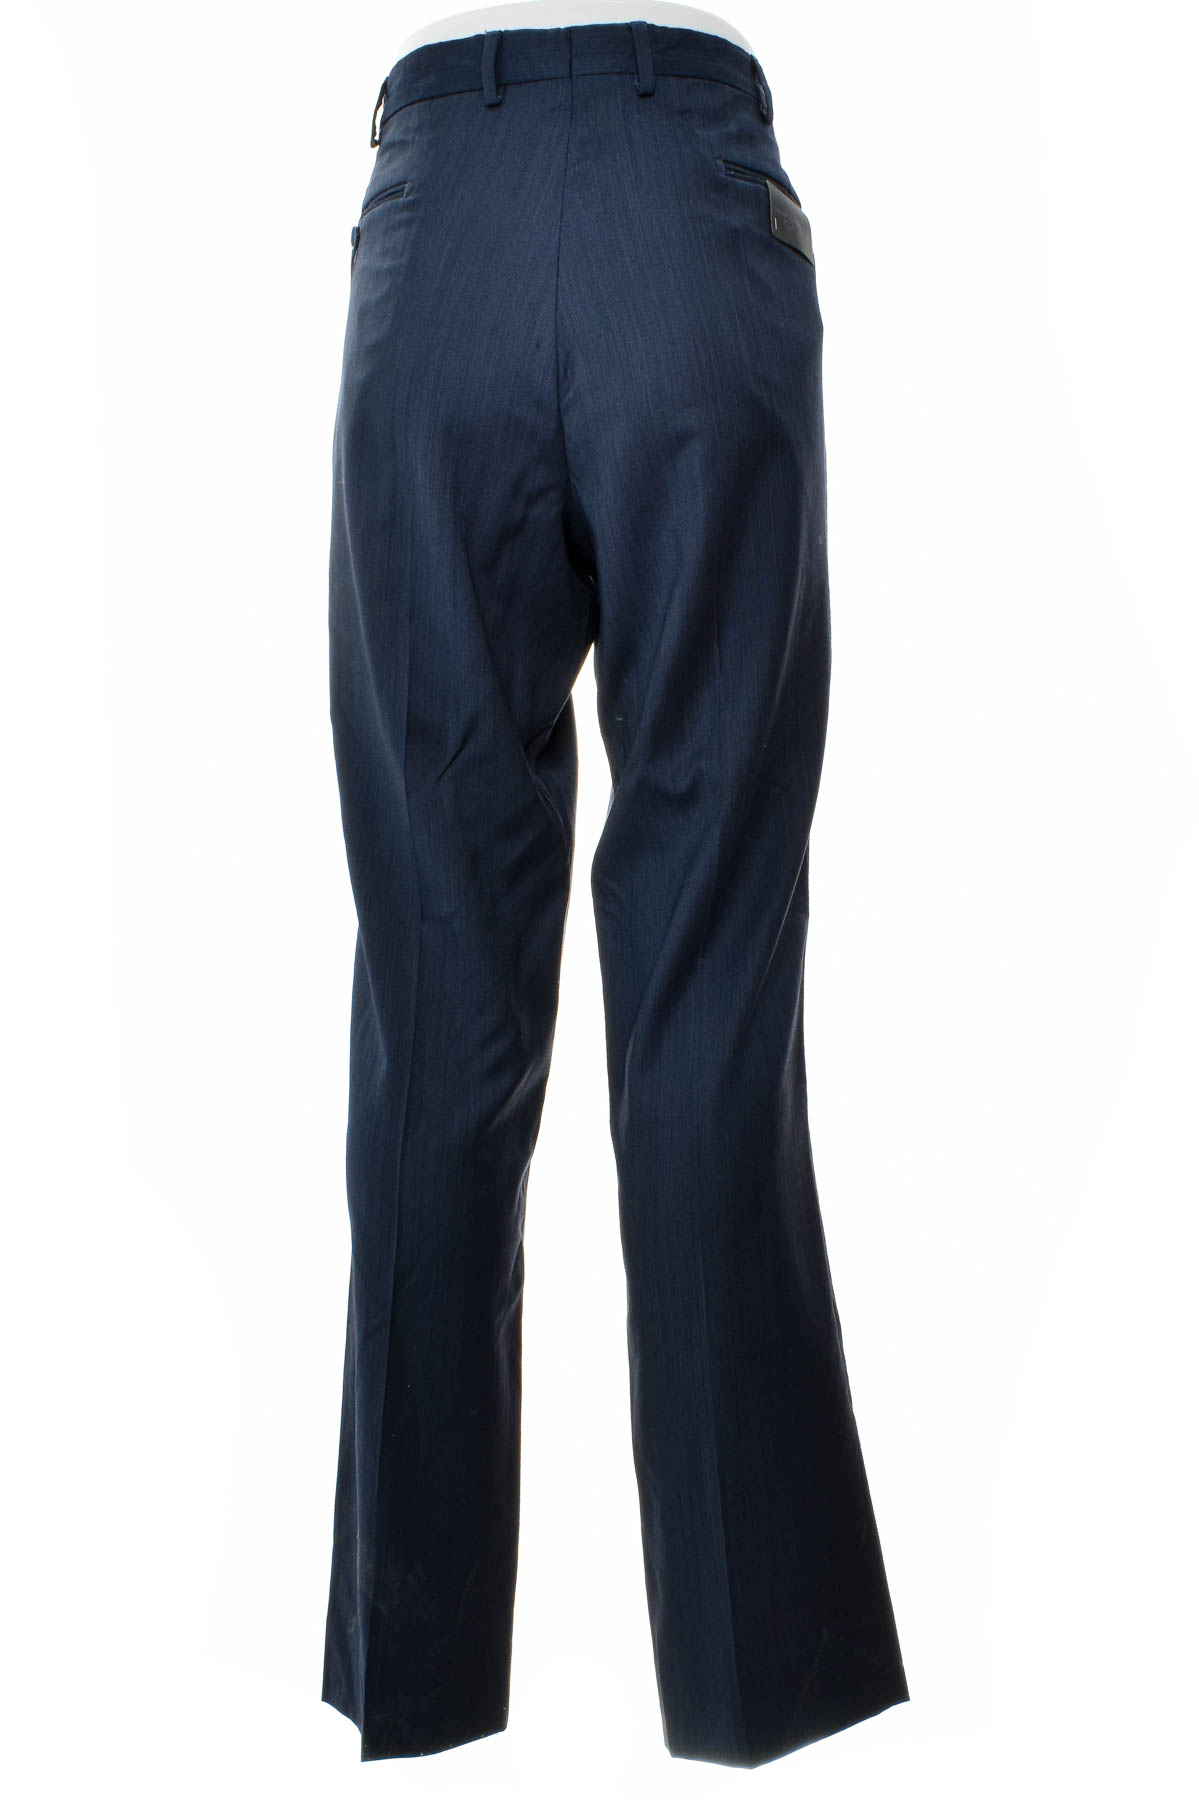 Men's trousers - Anthony Squires - 1